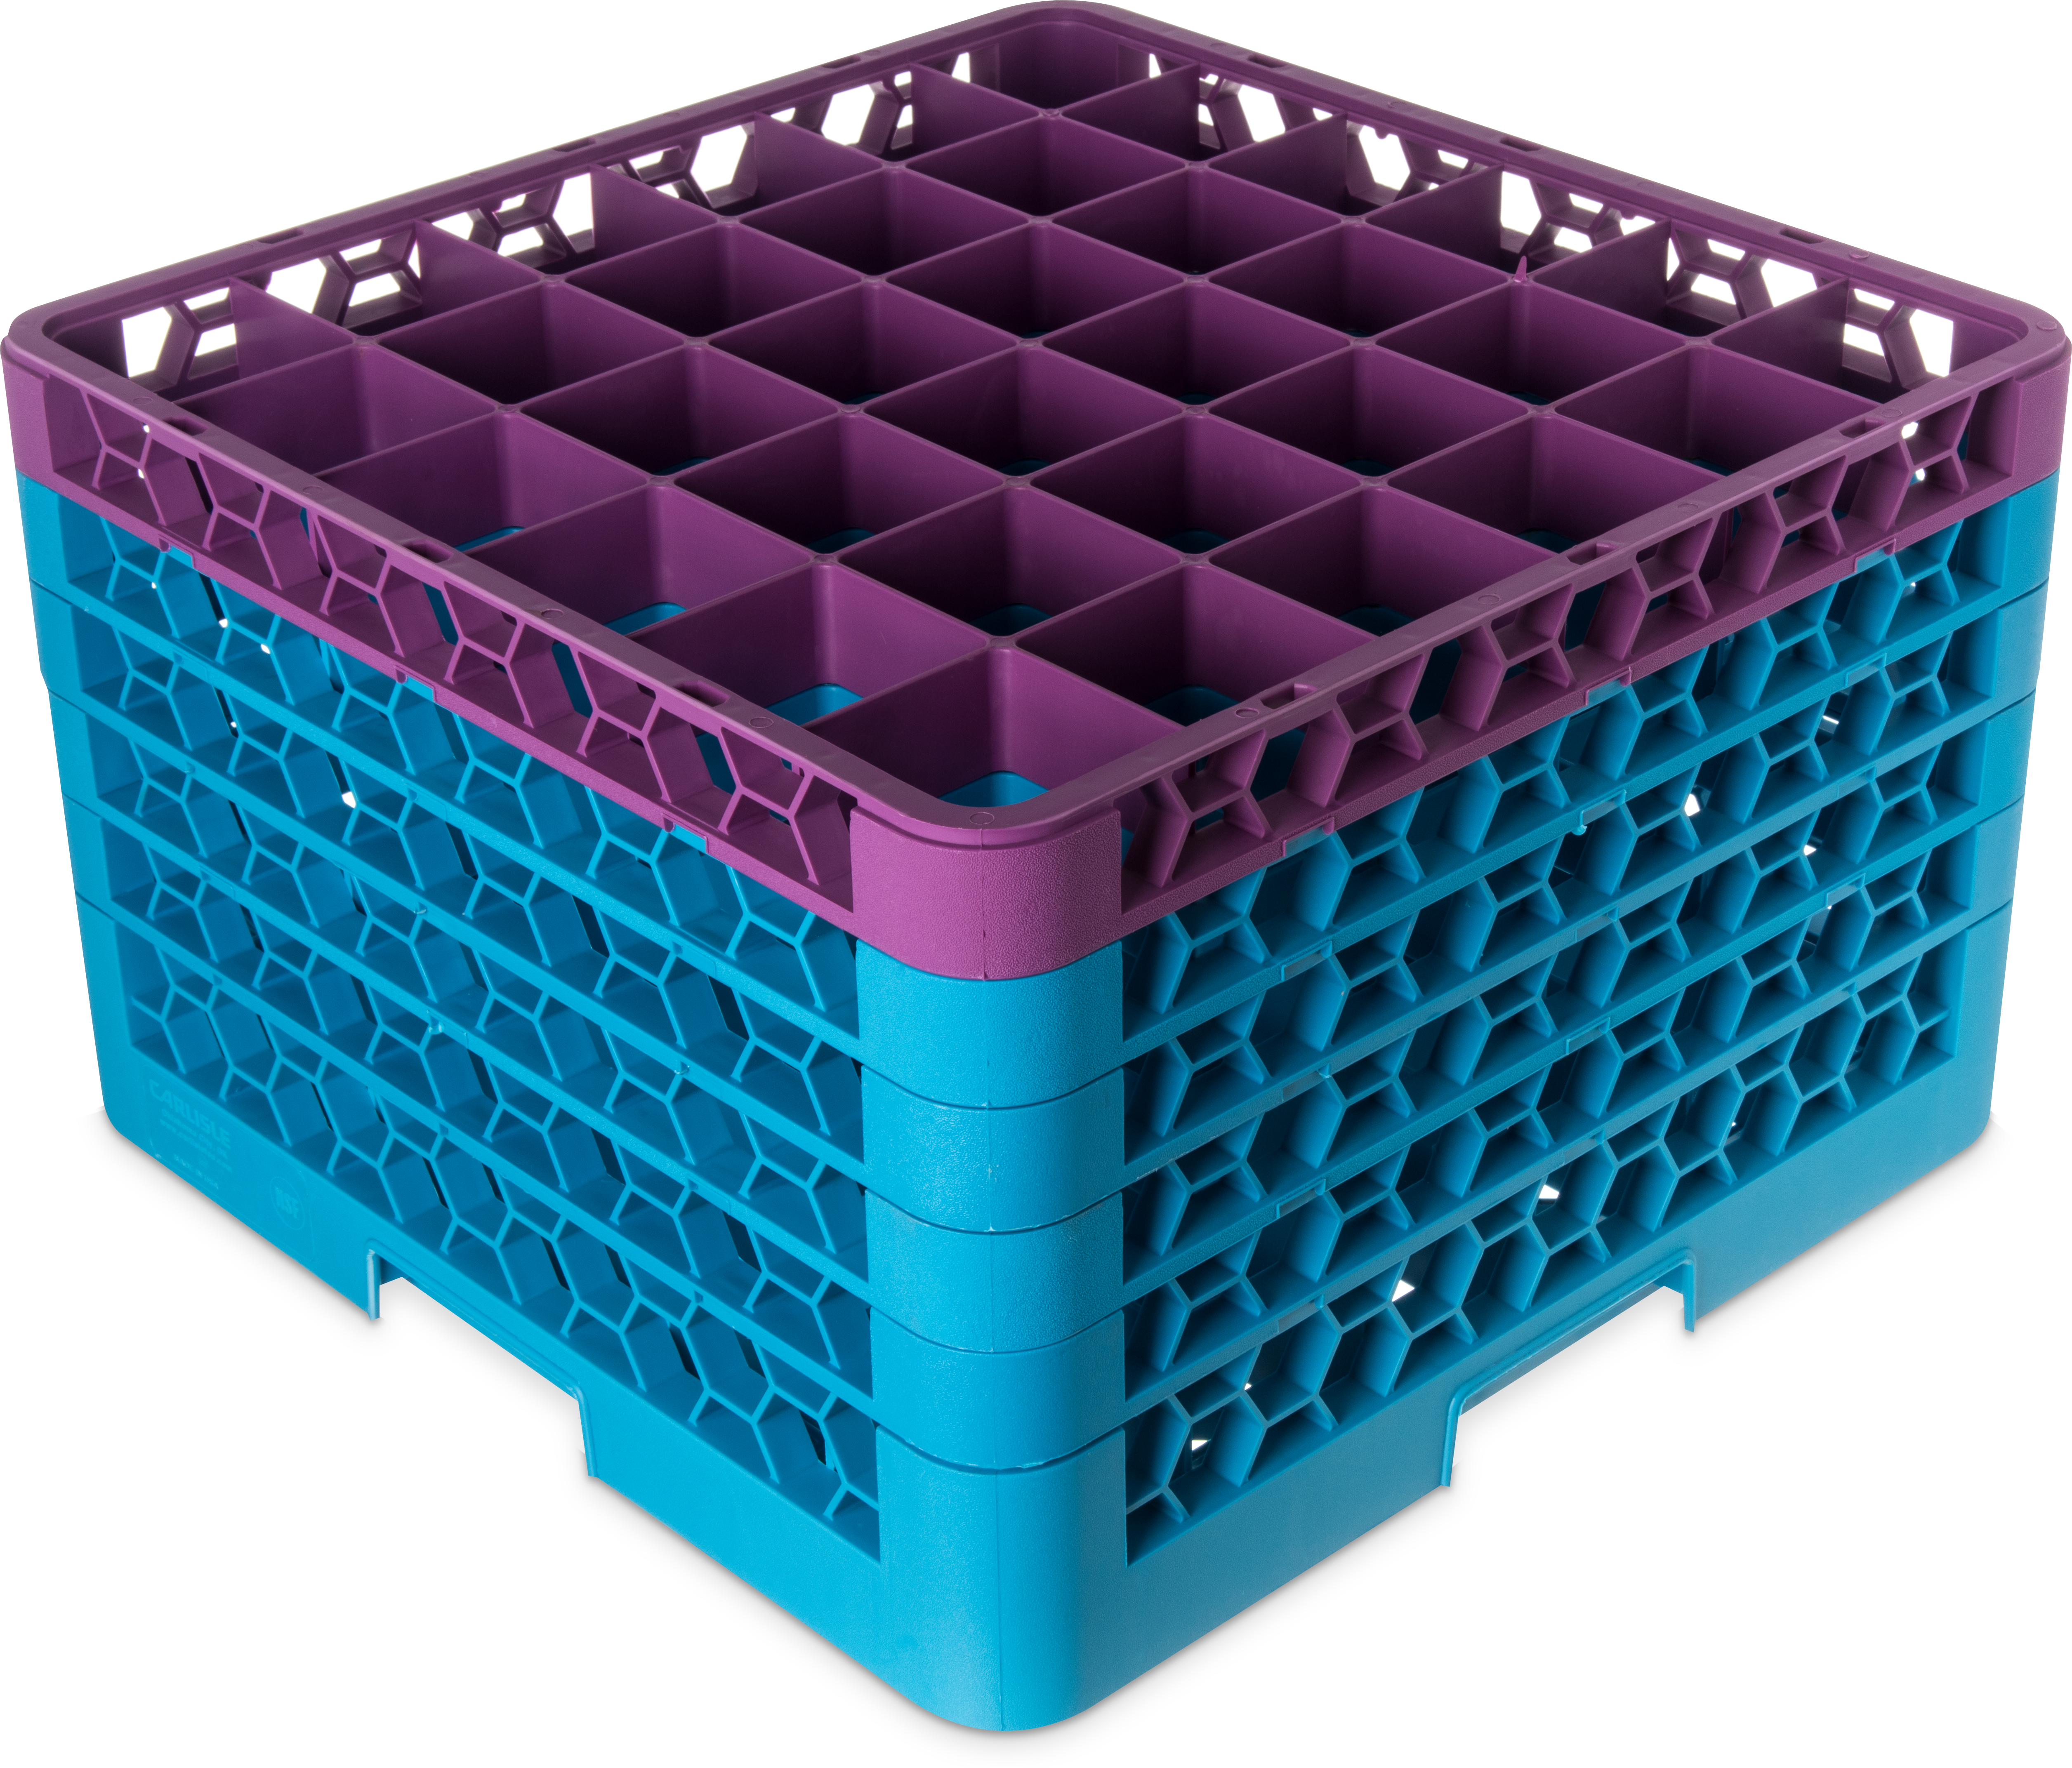 OptiClean 36 Compartment Glass Rack with 5 Extenders 11.9 - Lavender-Carlisle Blue